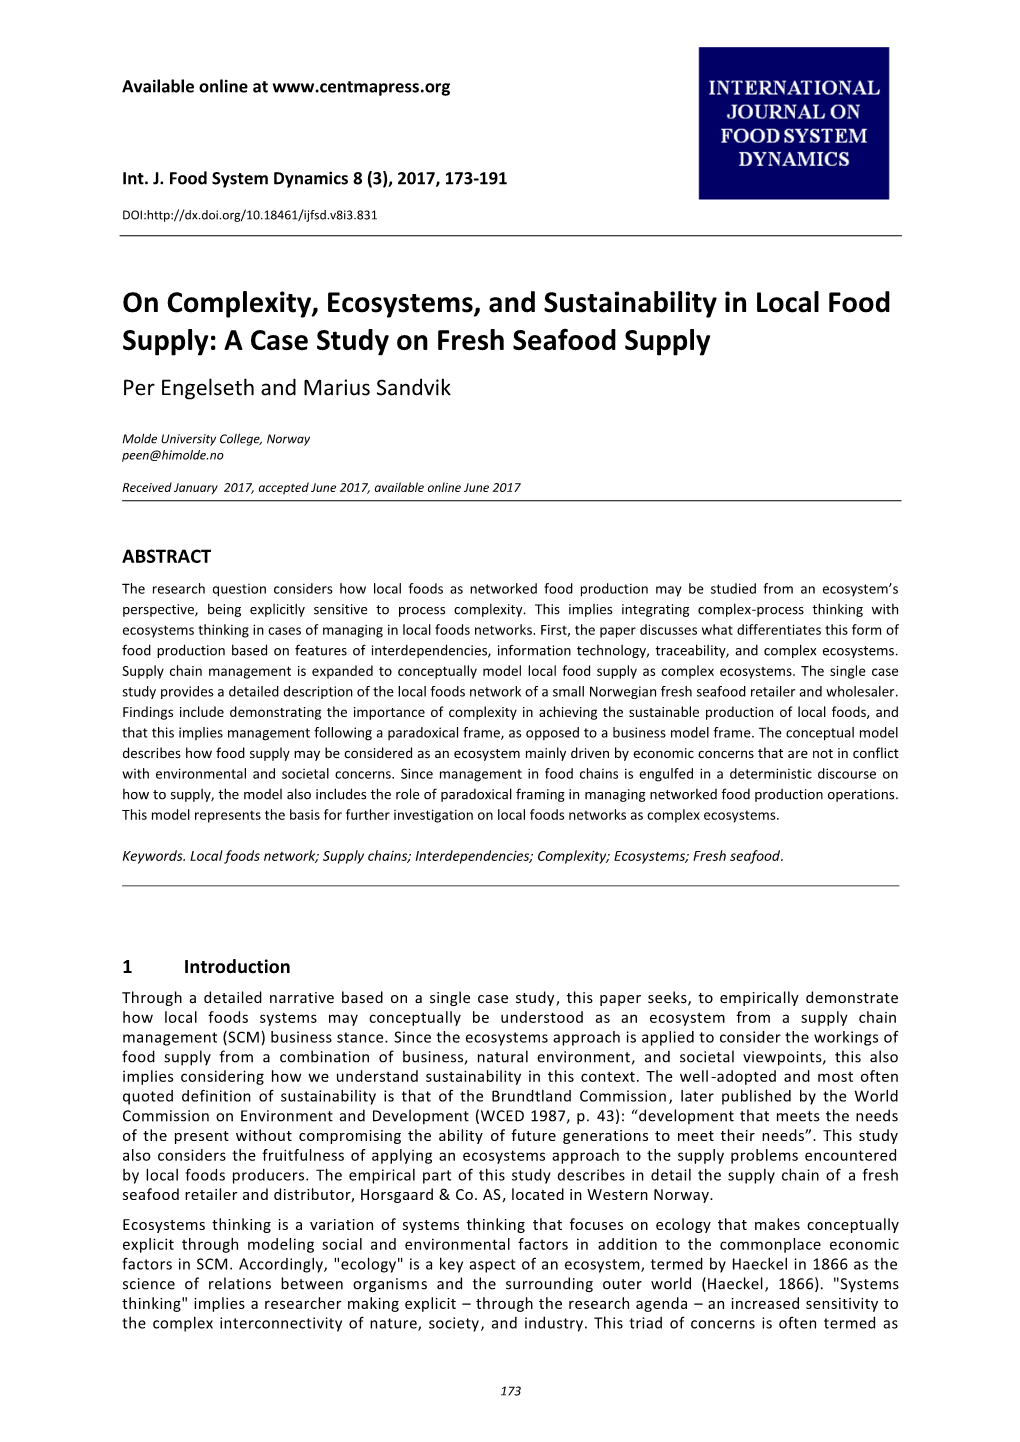 On Complexity, Ecosystems, and Sustainability in Local Food Supply: a Case Study on Fresh Seafood Supply Per Engelseth and Marius Sandvik